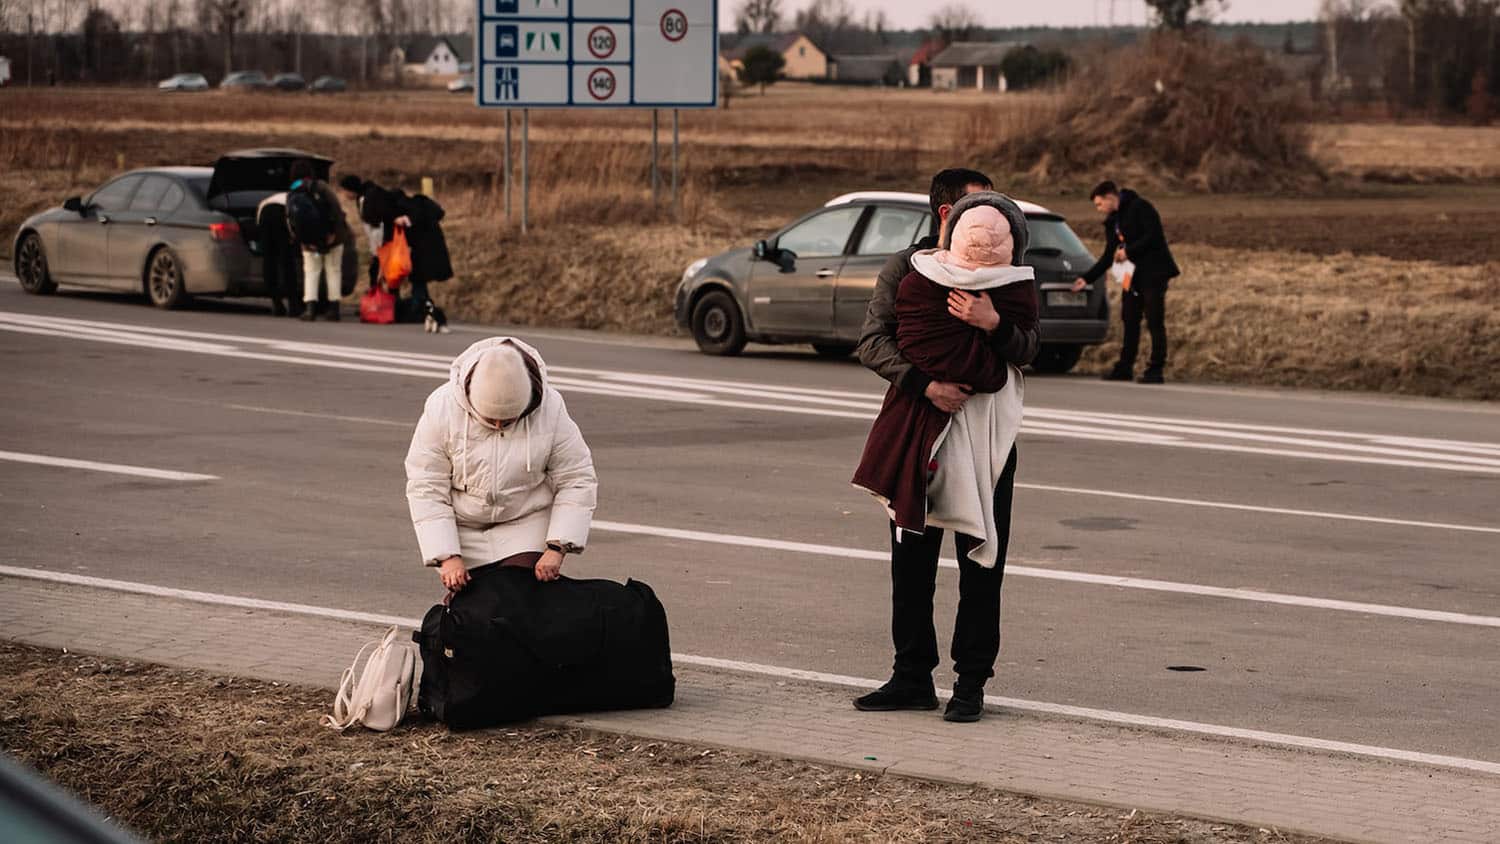 two adult Ukrainian refugees stand by a roadside. One of them is holding a child. The road signs tell you that the scene is inside the European Union.